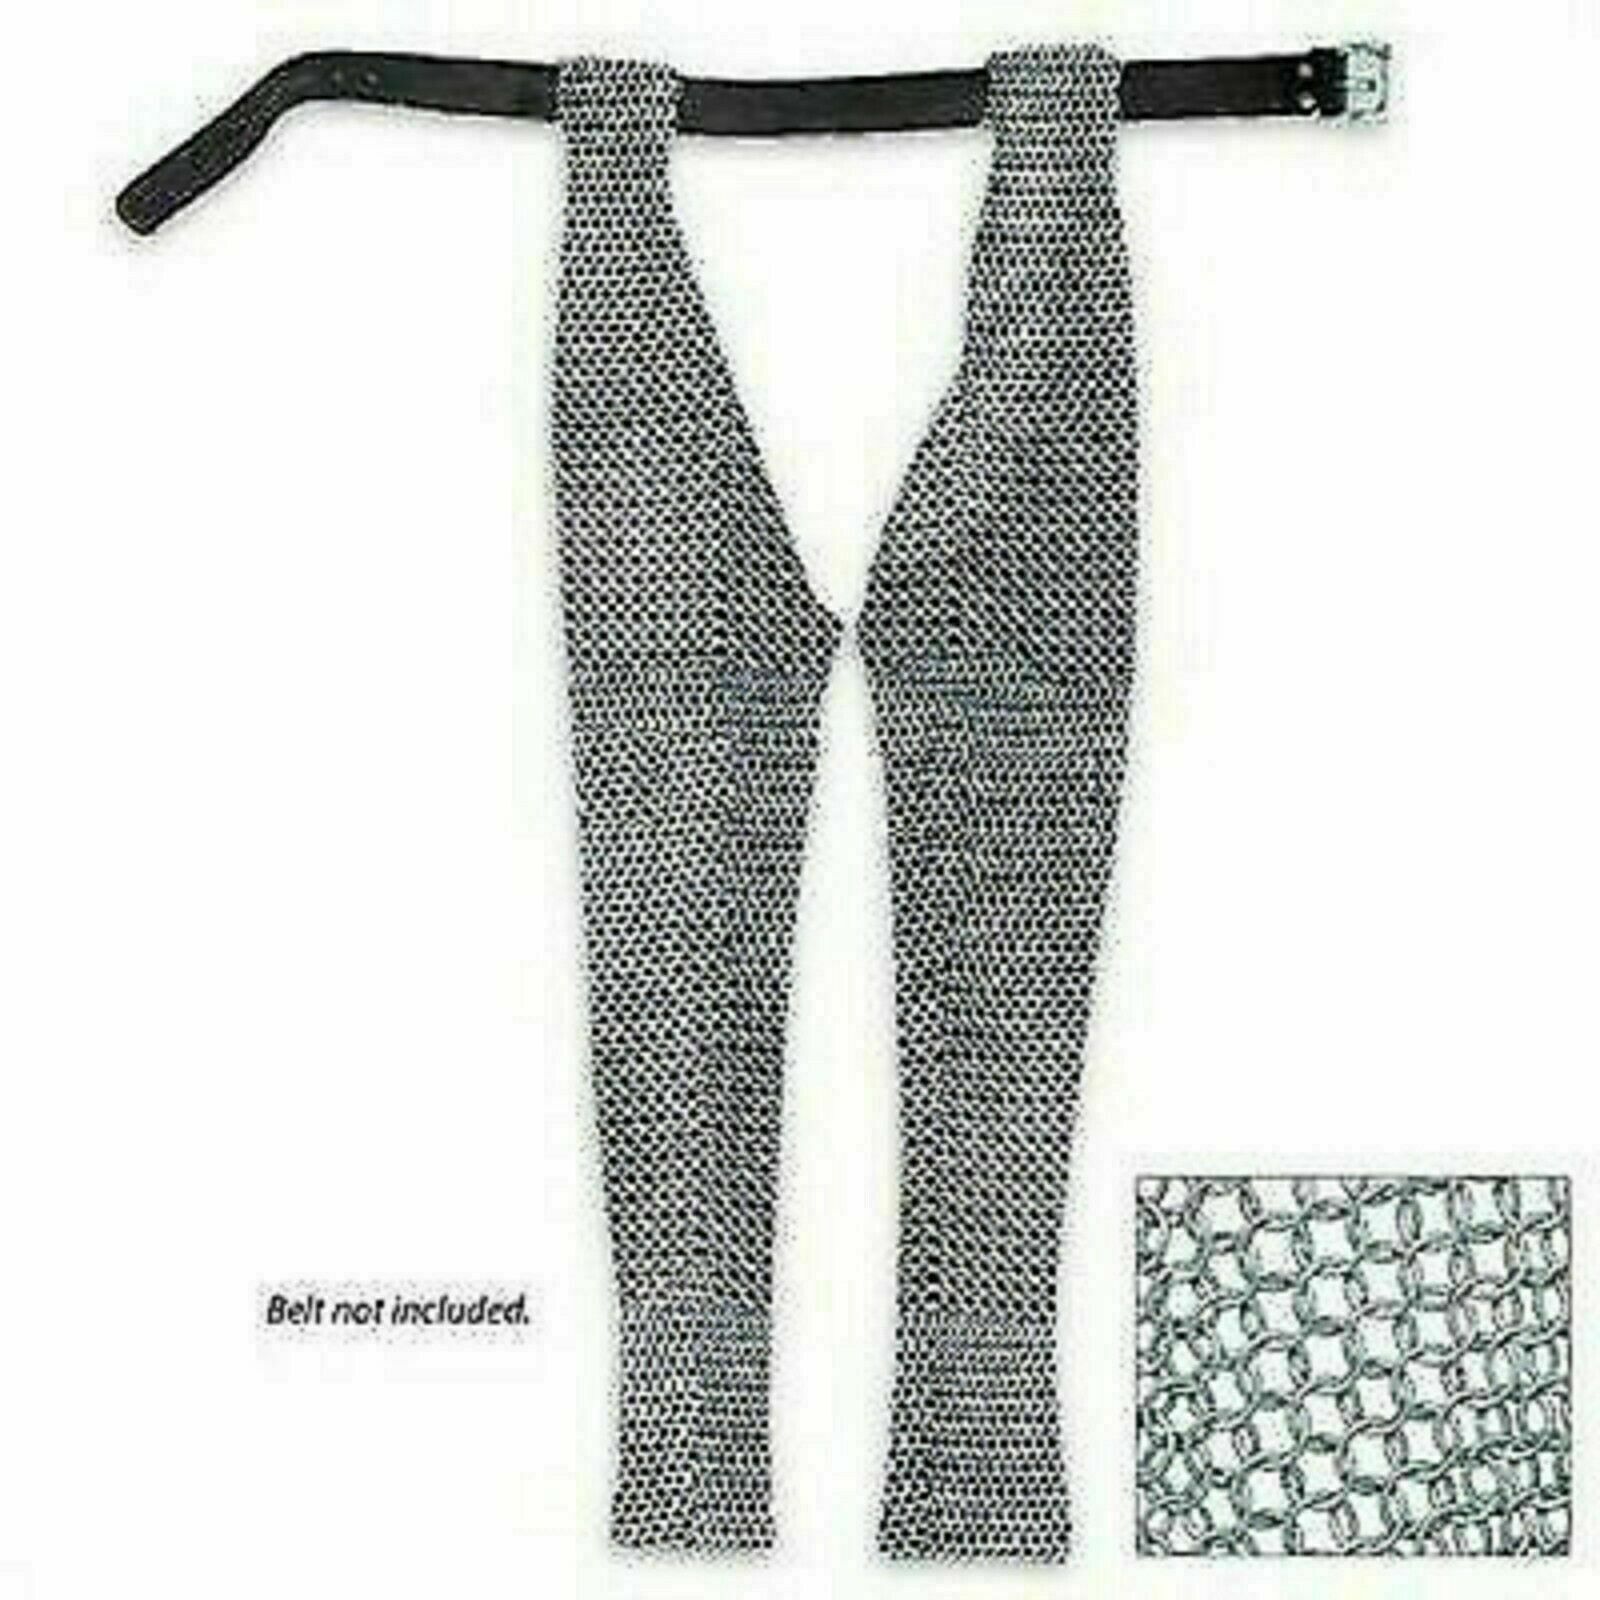 Medieval Battle Ready Chausses Chain Mail Leggings Best Gifting Item ASA